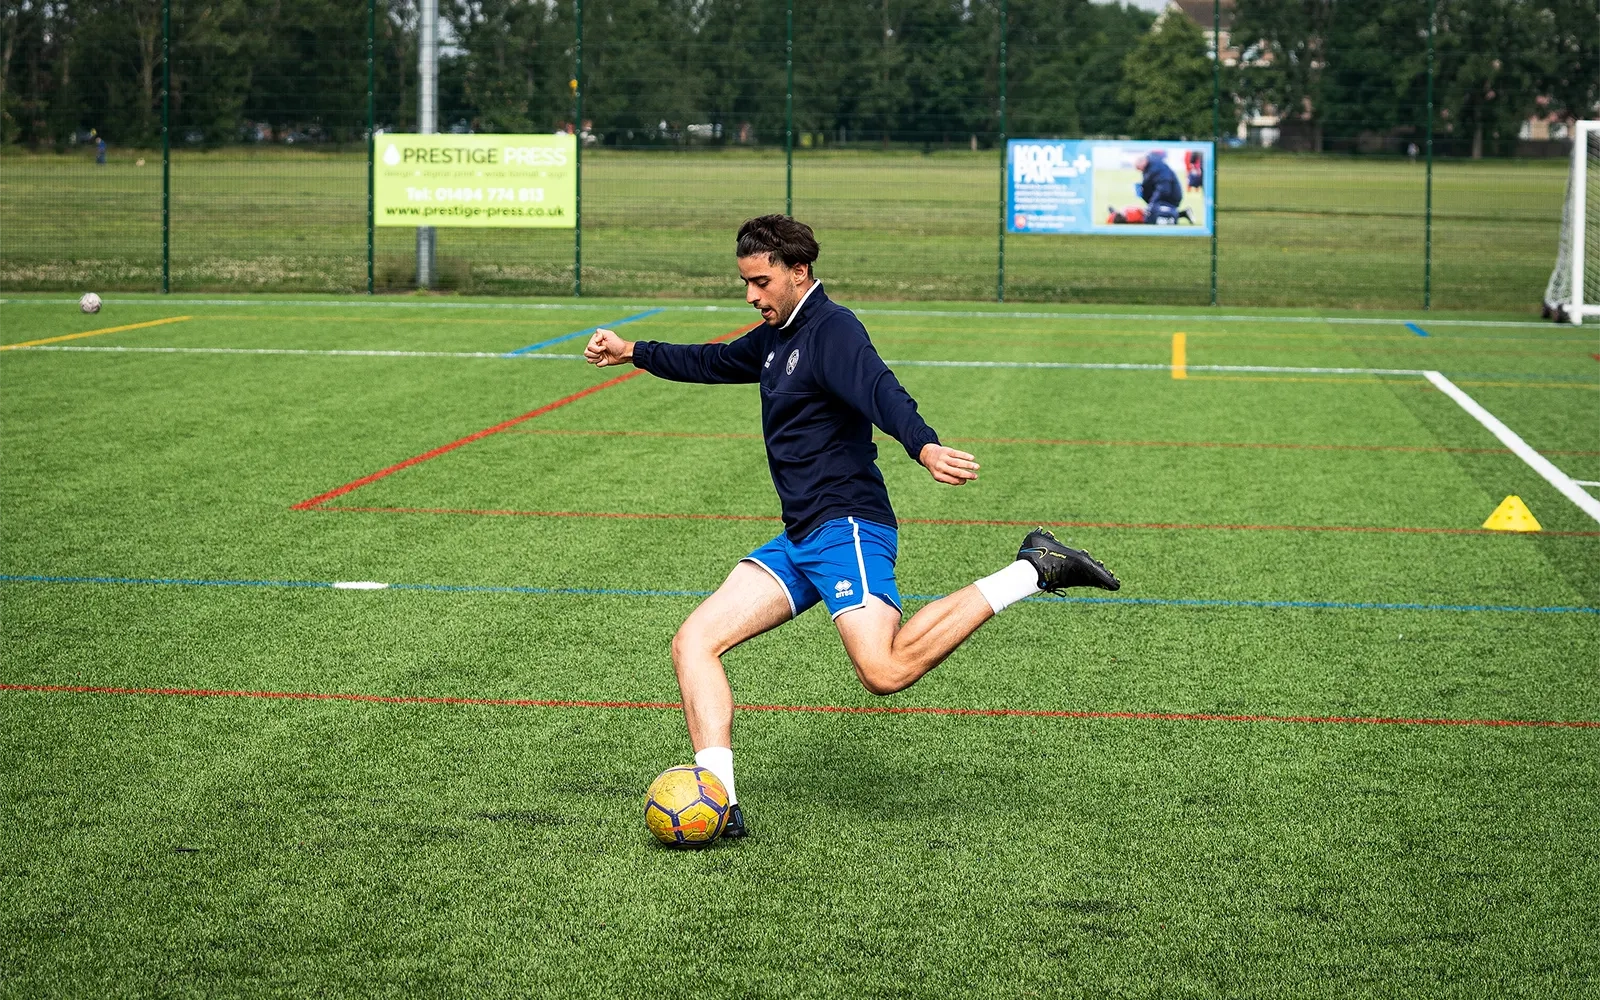 An action shot of a teenage boy during a football training session at a football pitch